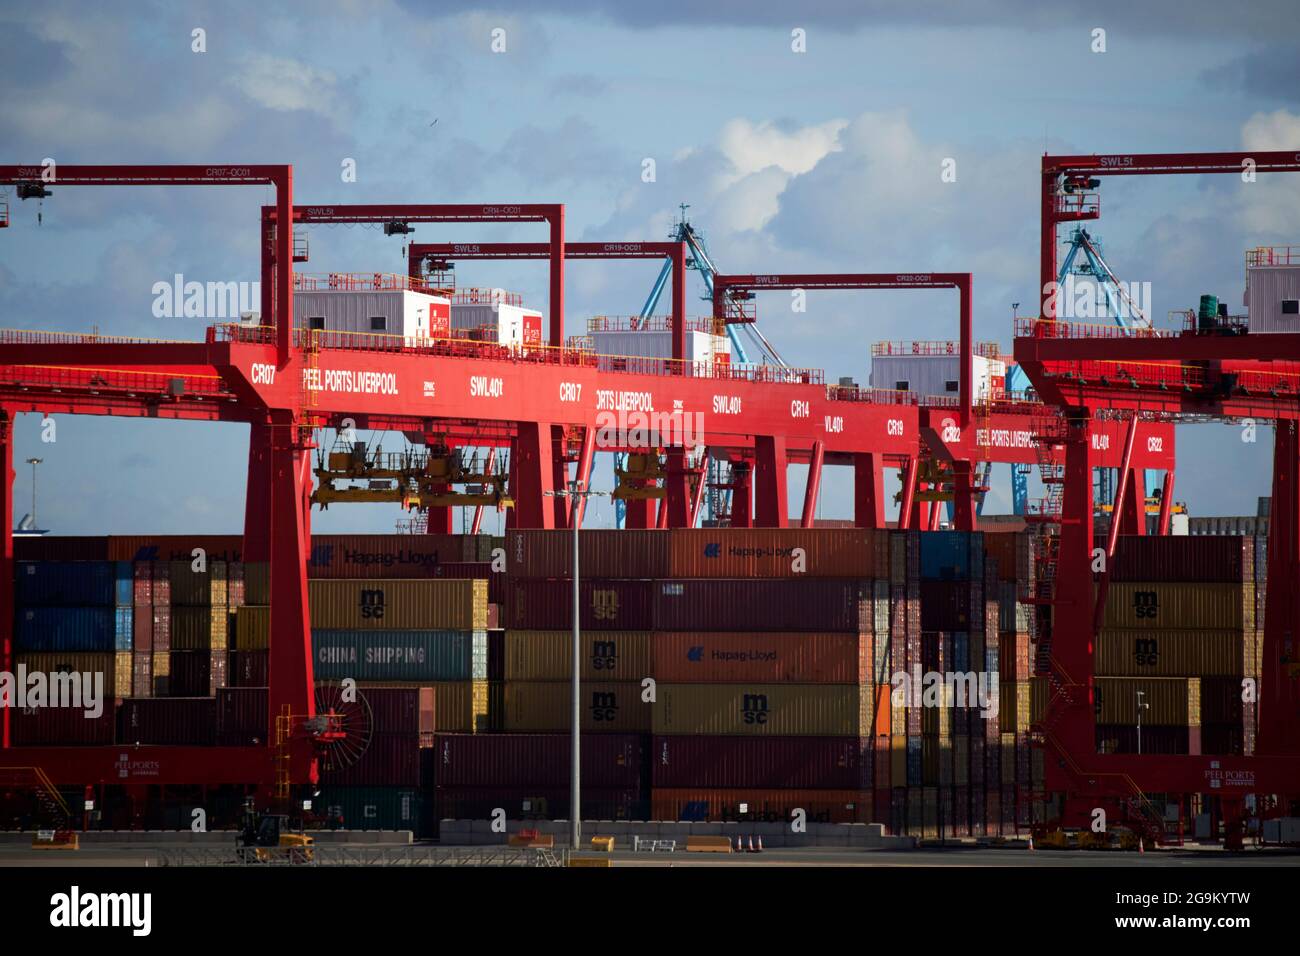 cranes and shipping containers at liverpool 2 container terminal freeport liverpool england uk Stock Photo